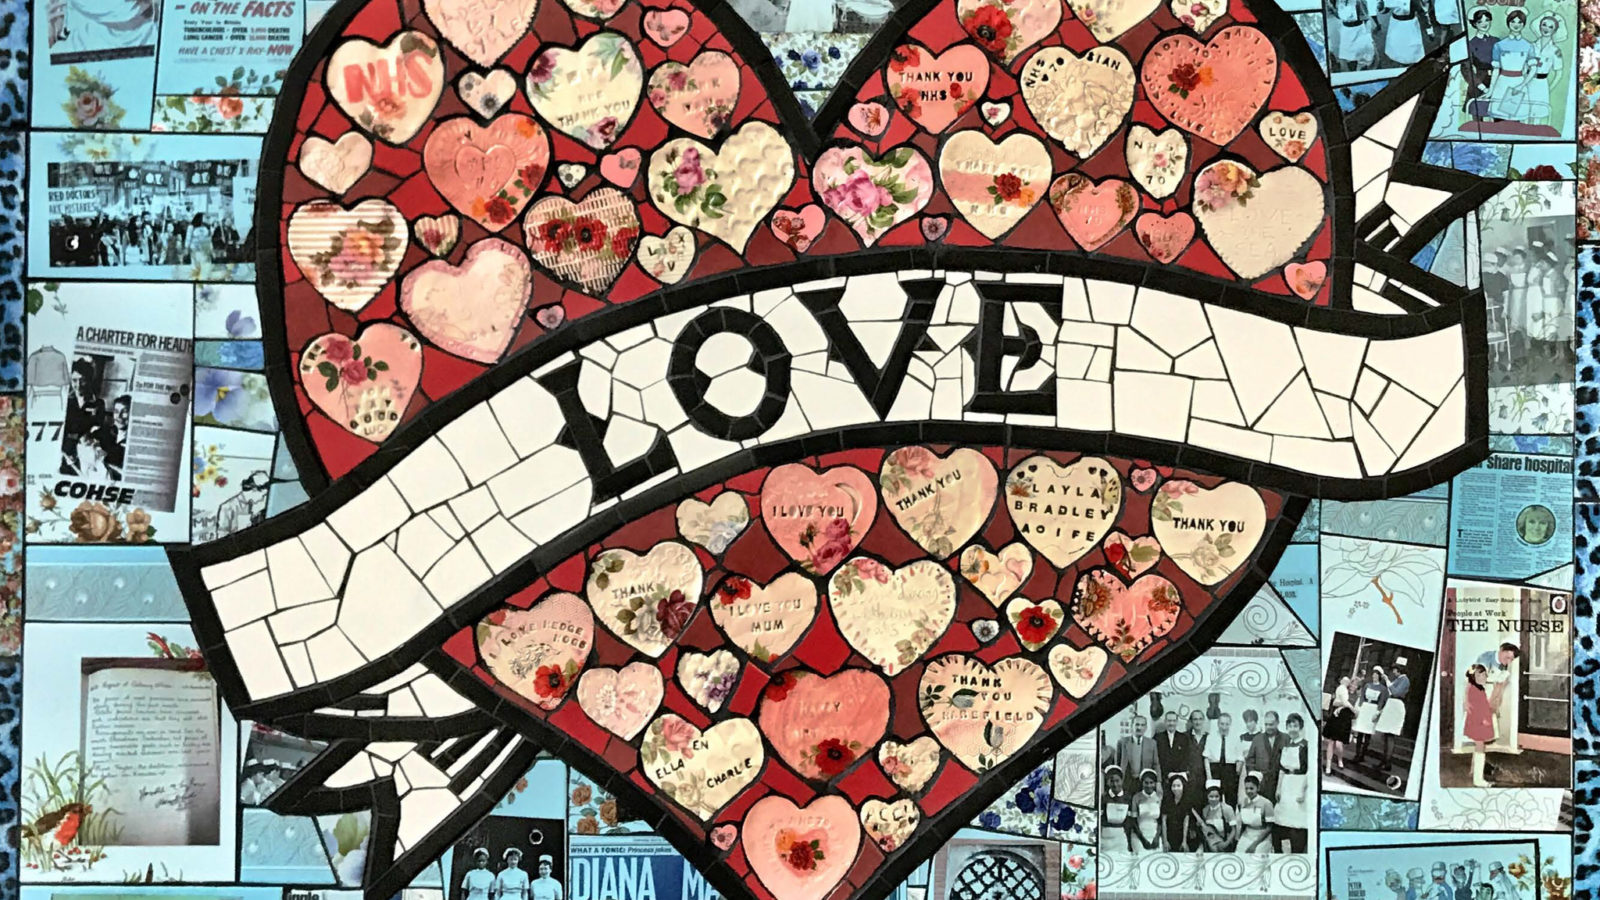 Mosaic by Carrie Reichardt that reads 'Love' on a banner in front of a red mosaic heart, on a light blue mosaic background.